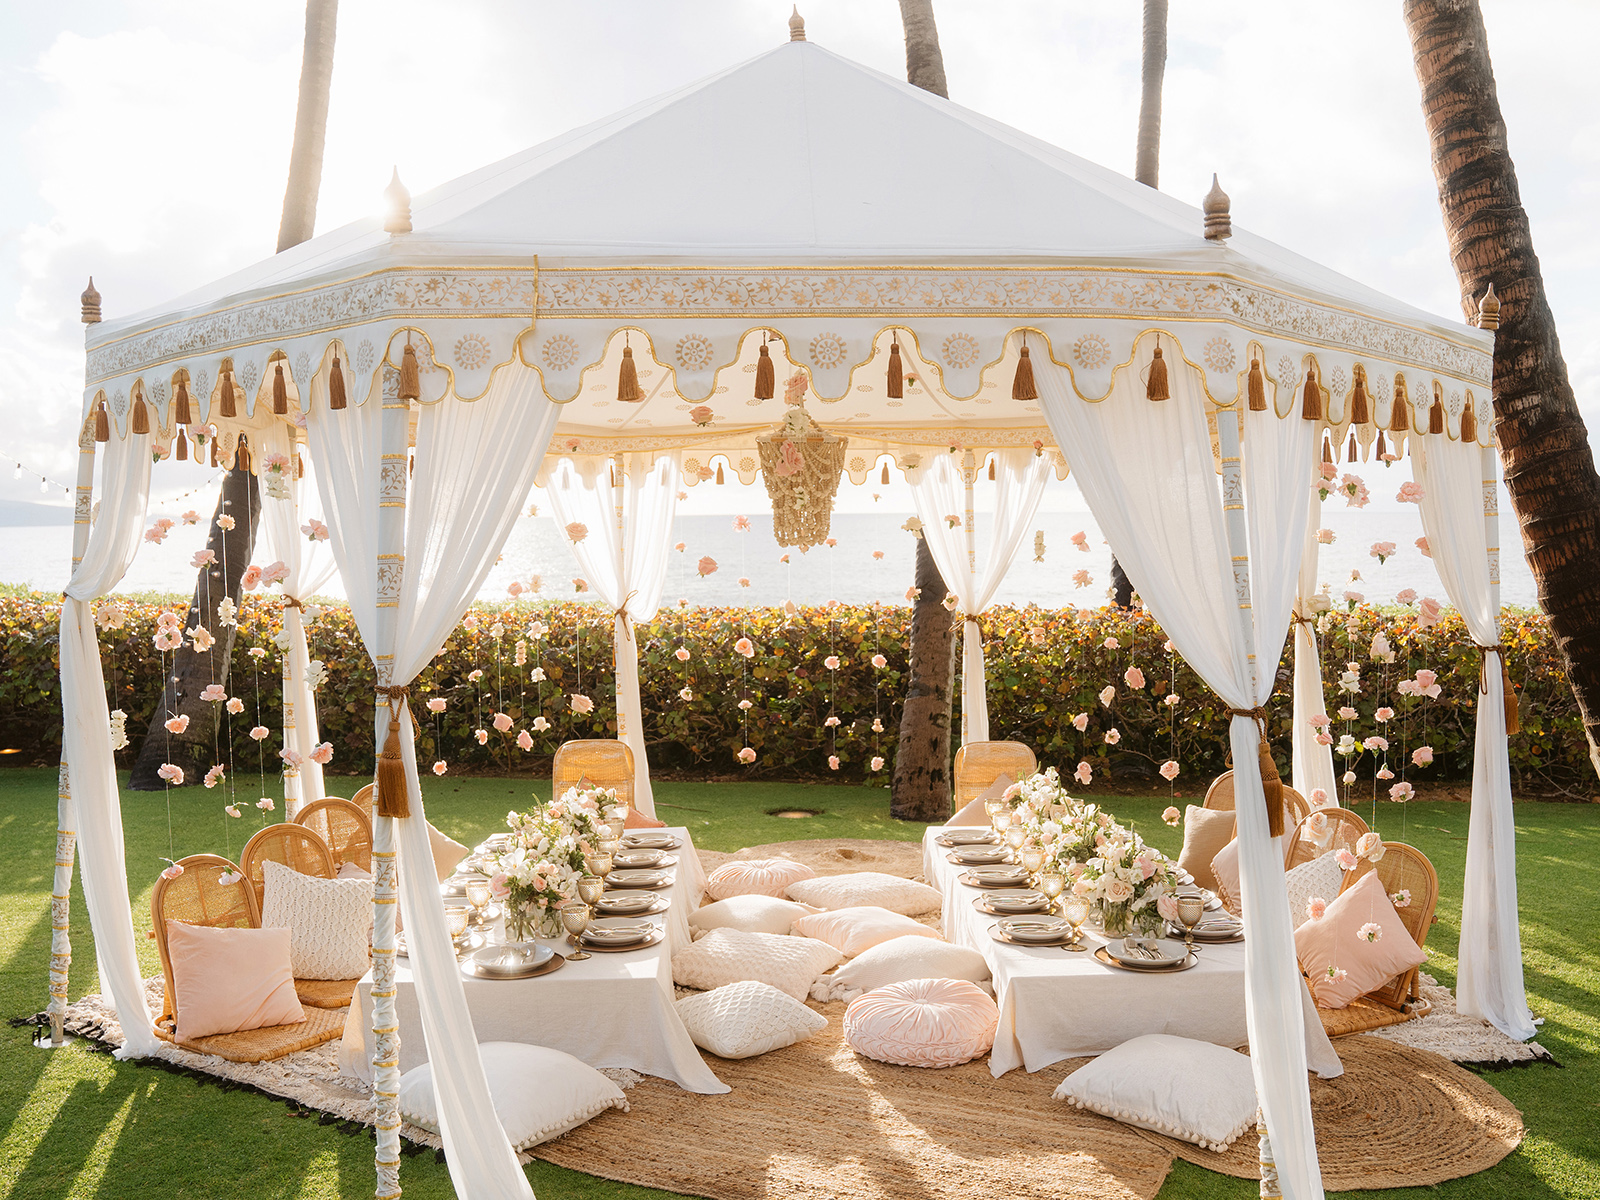 Cream tent with low picnic tables and cushions underneath